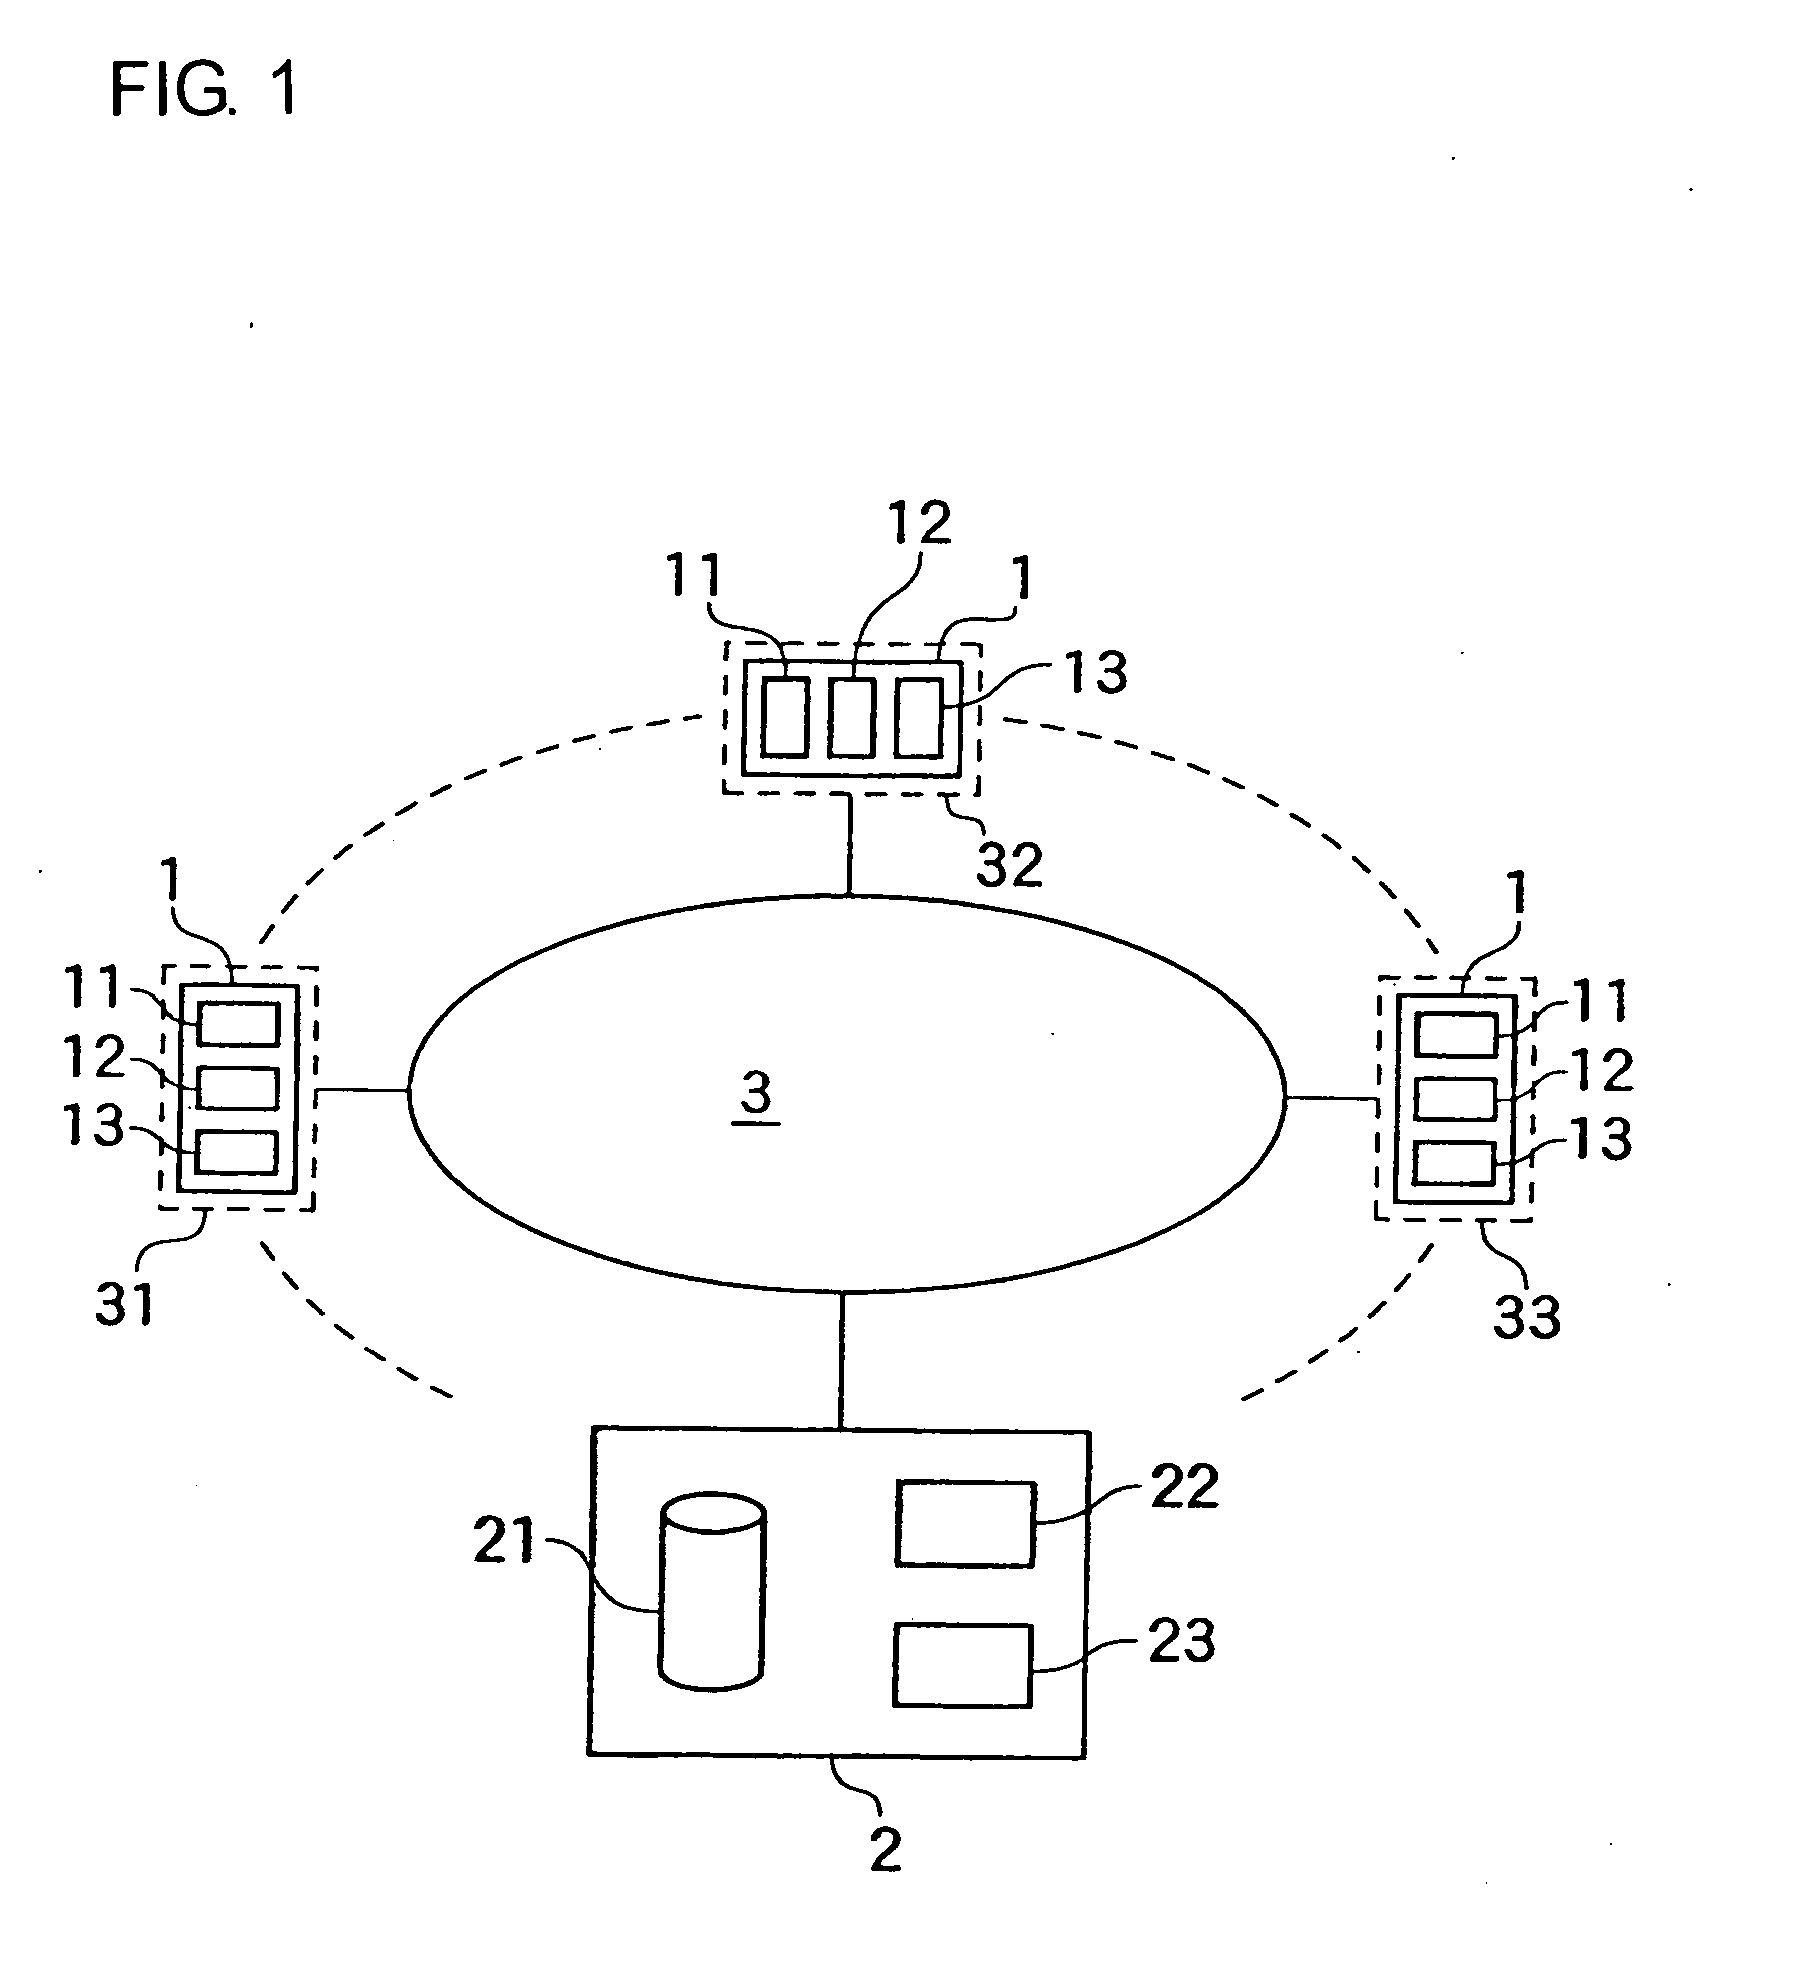 Rapid charging battery charging system